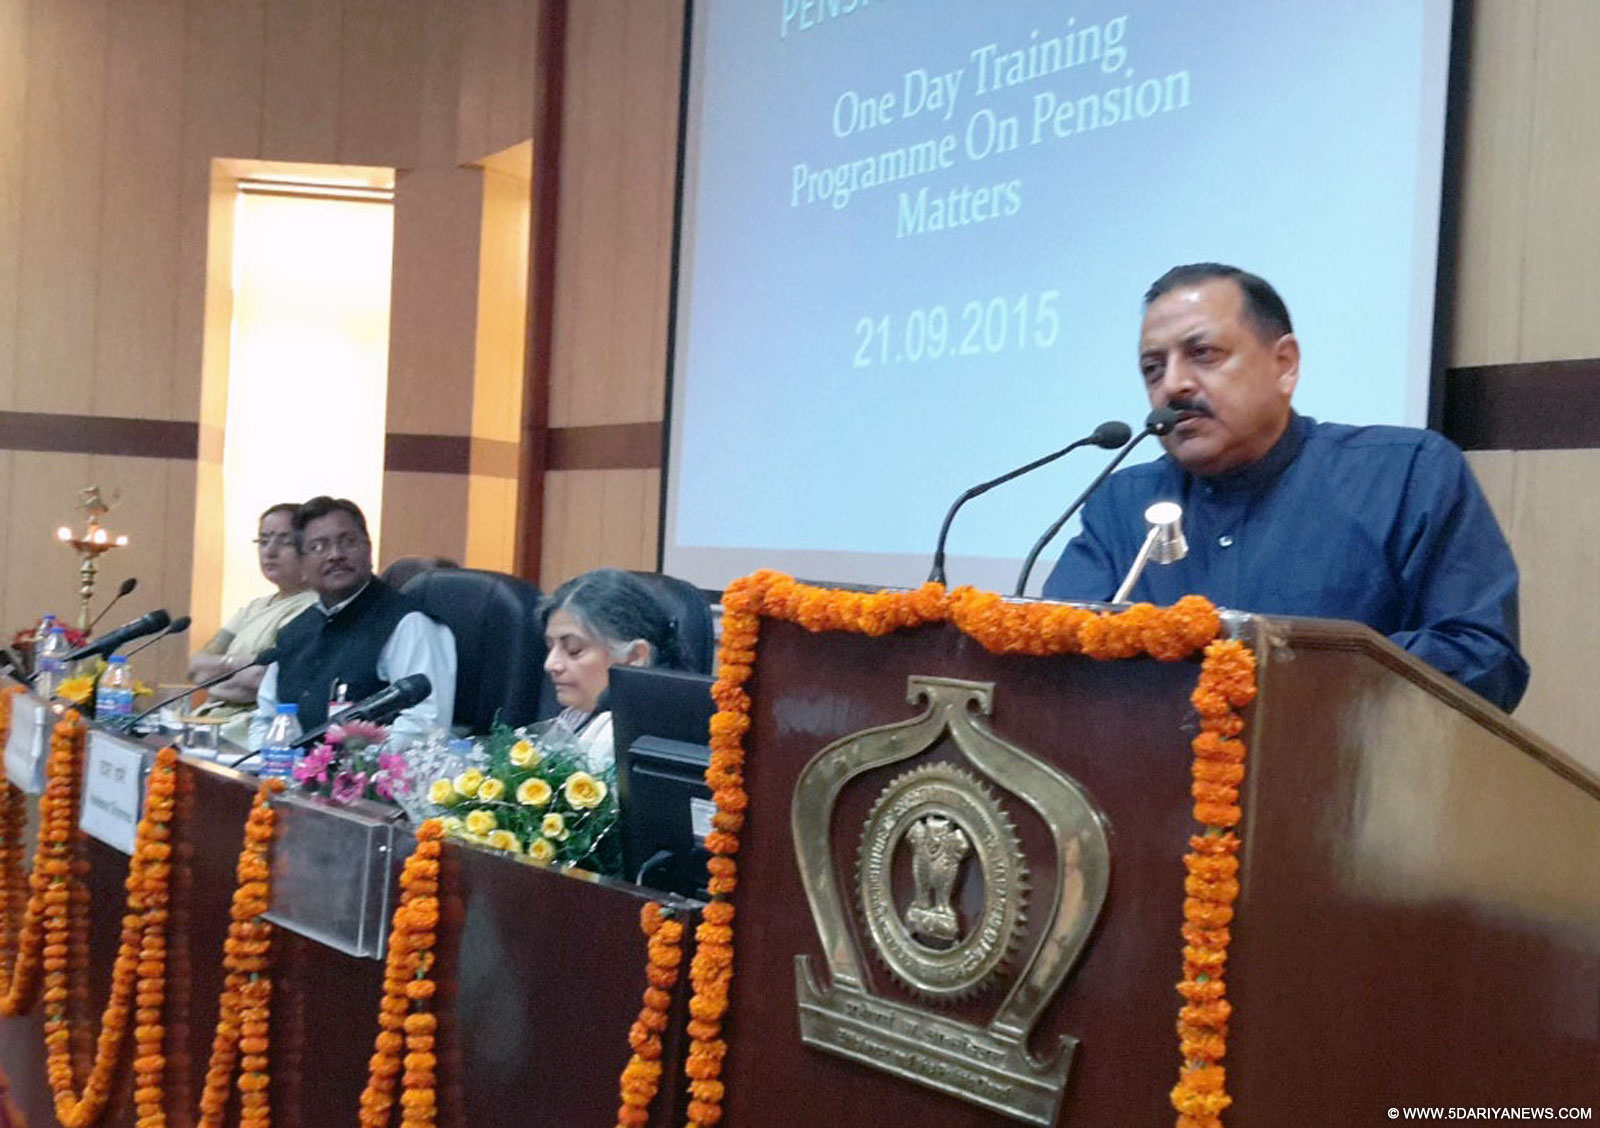 Dr. Jitendra Singh addressing the one-day training programme on pension related matters for officials from different Ministries and Departments, at the Institute of Secretariat Training and Management, in New Delhi on September 21, 2015.